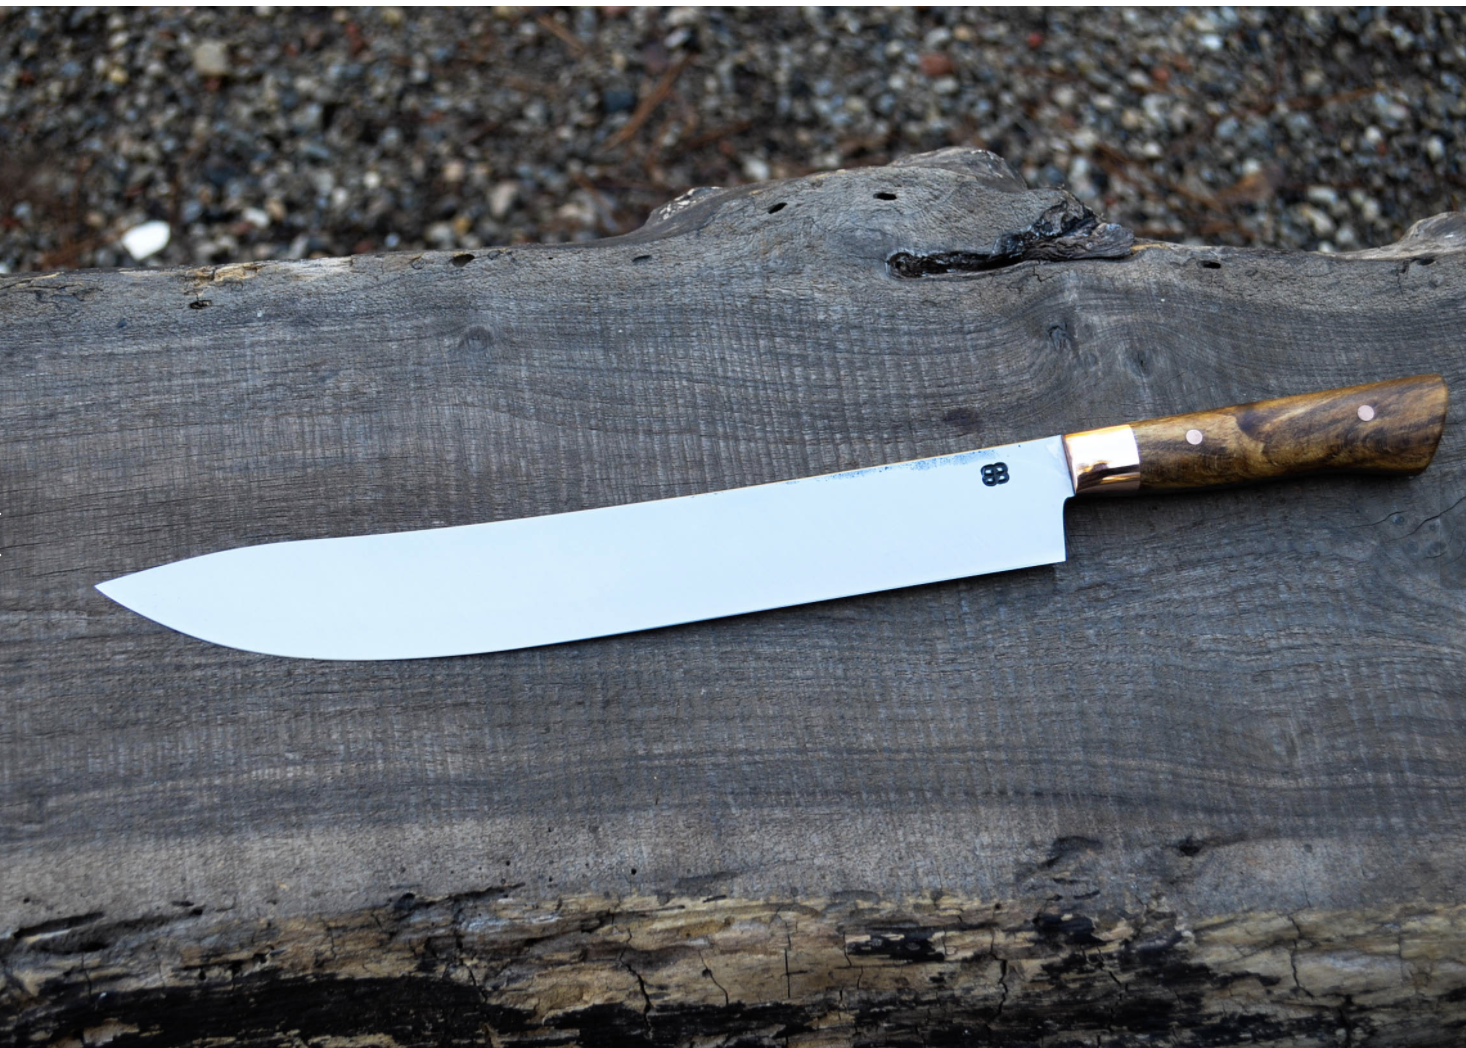  11.25” Full-Tang Cimeter. Copper Beech Handle with Copper Bolsters and Pins.  